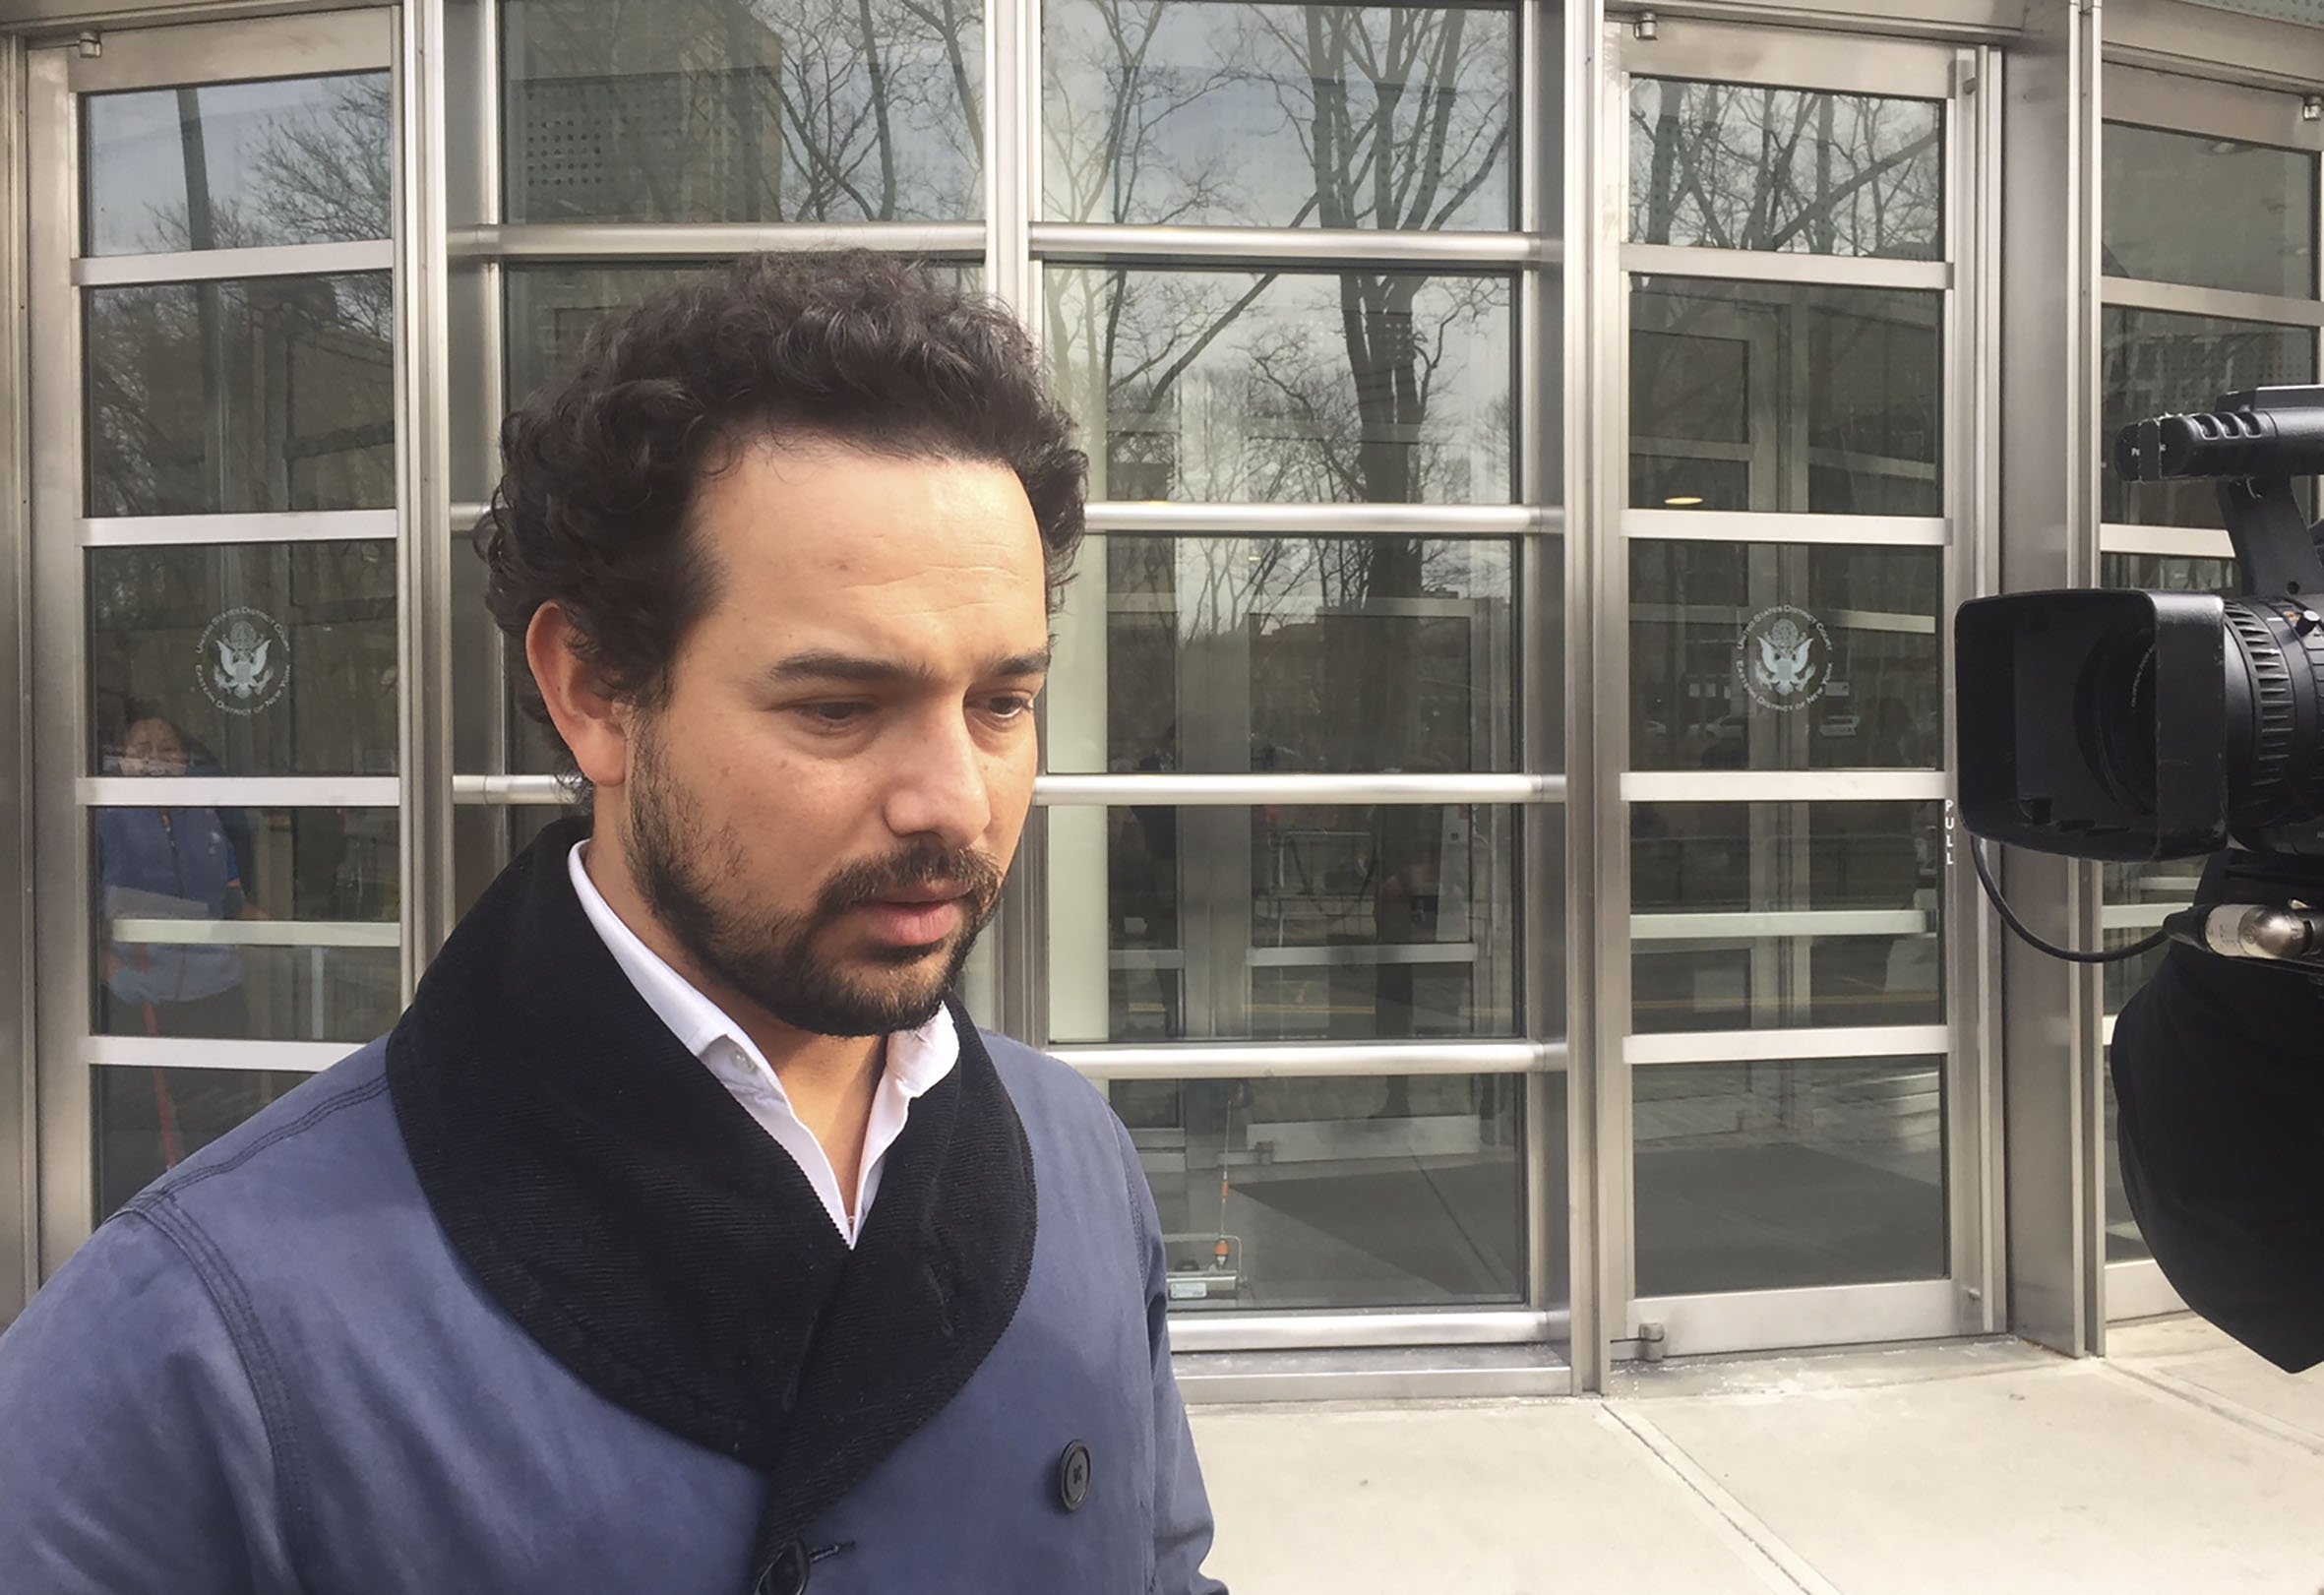 Mexican actor Alejandro Edda, 34, who played Joaquin "El Chapo" Guzman in Netflixs "Narcos: Mexico", walks past media after he attended the trial of the Mexican drug lord in Brooklyn federal court